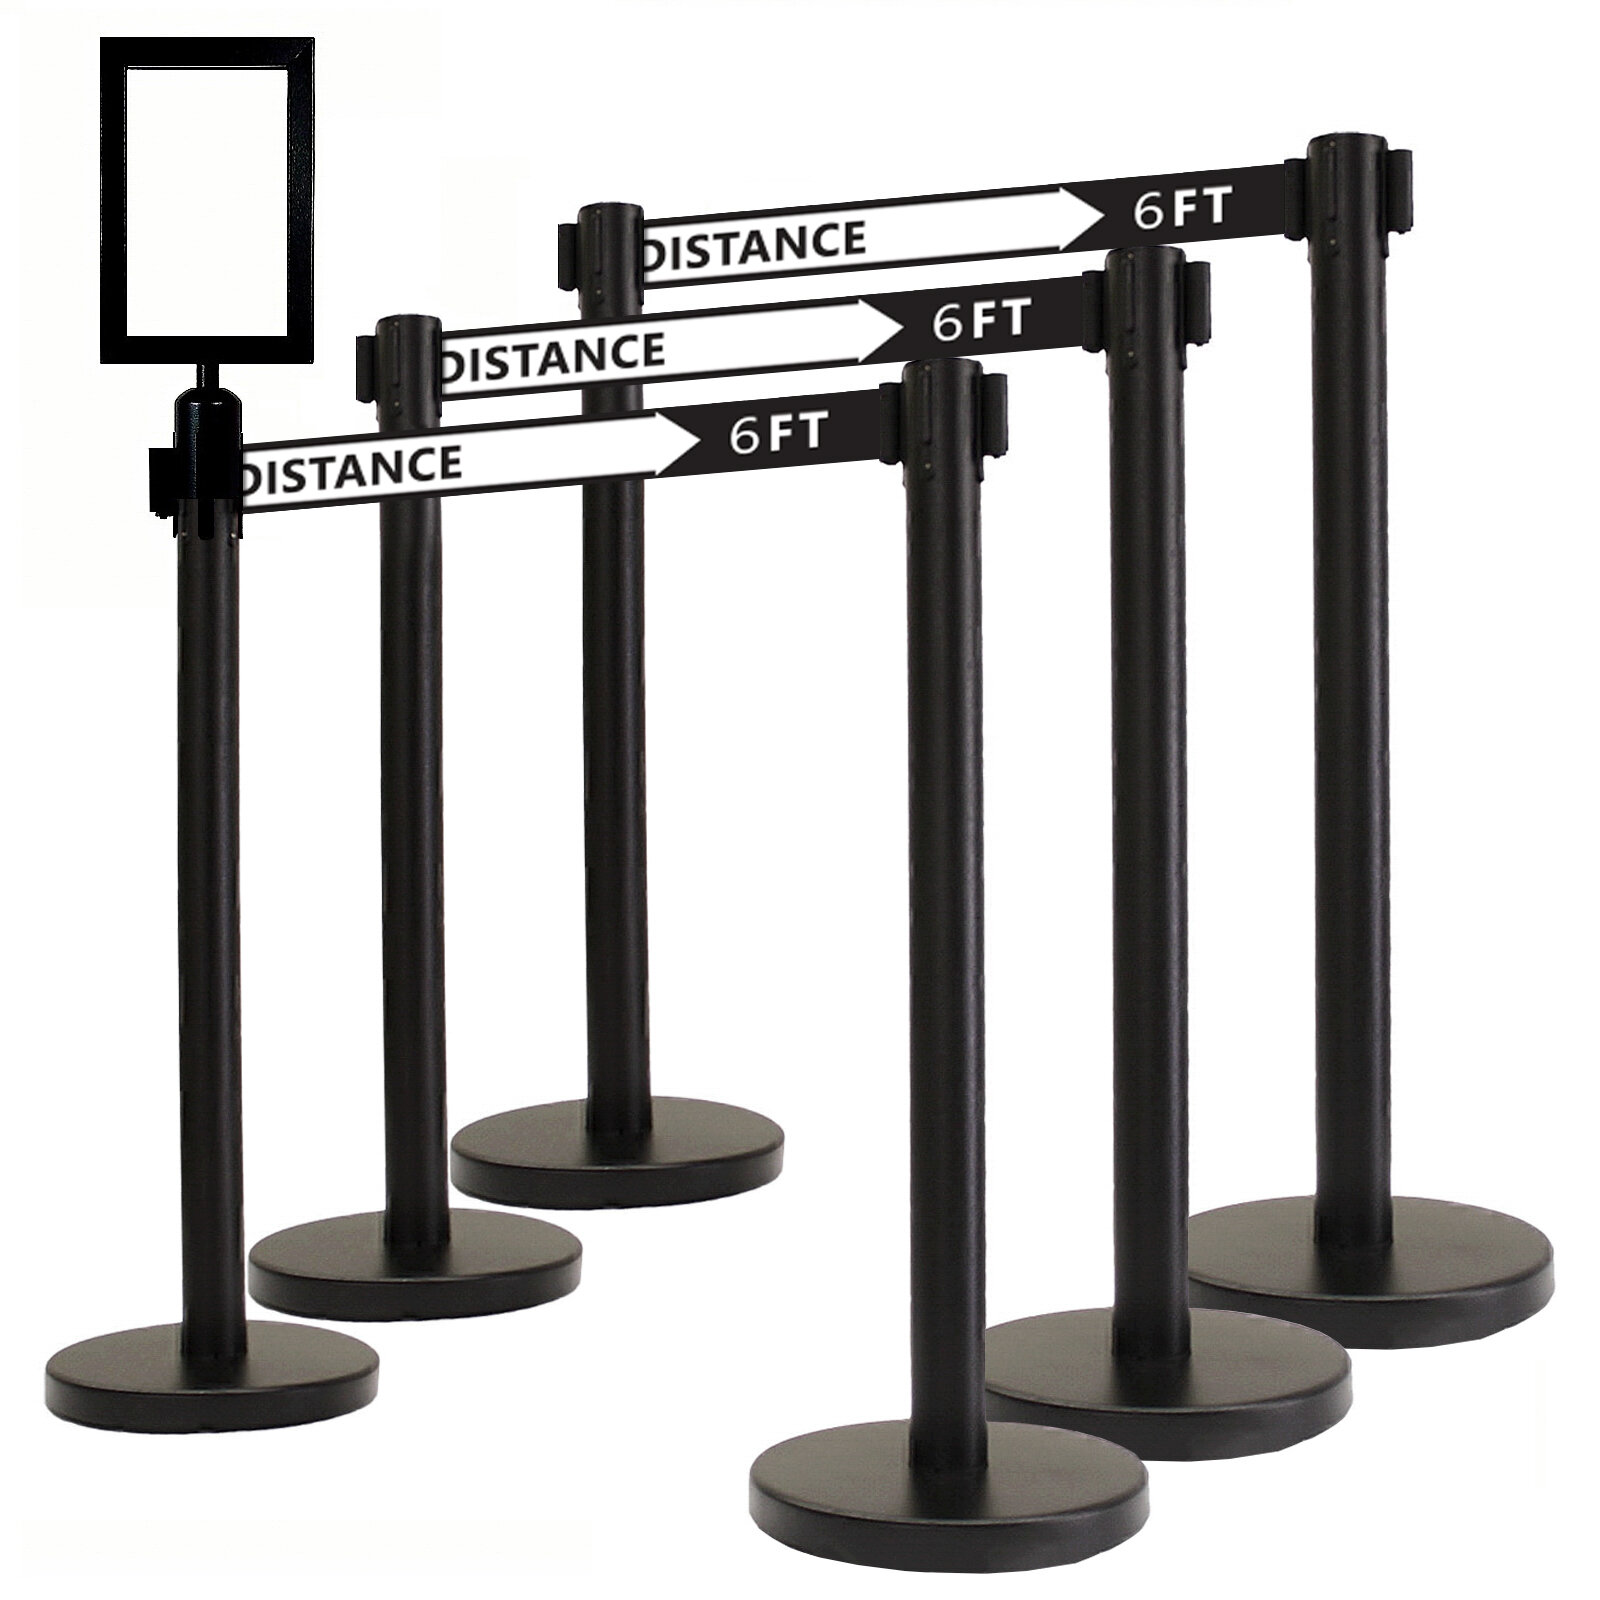 6FT SIGN STAND  Queue Solutions